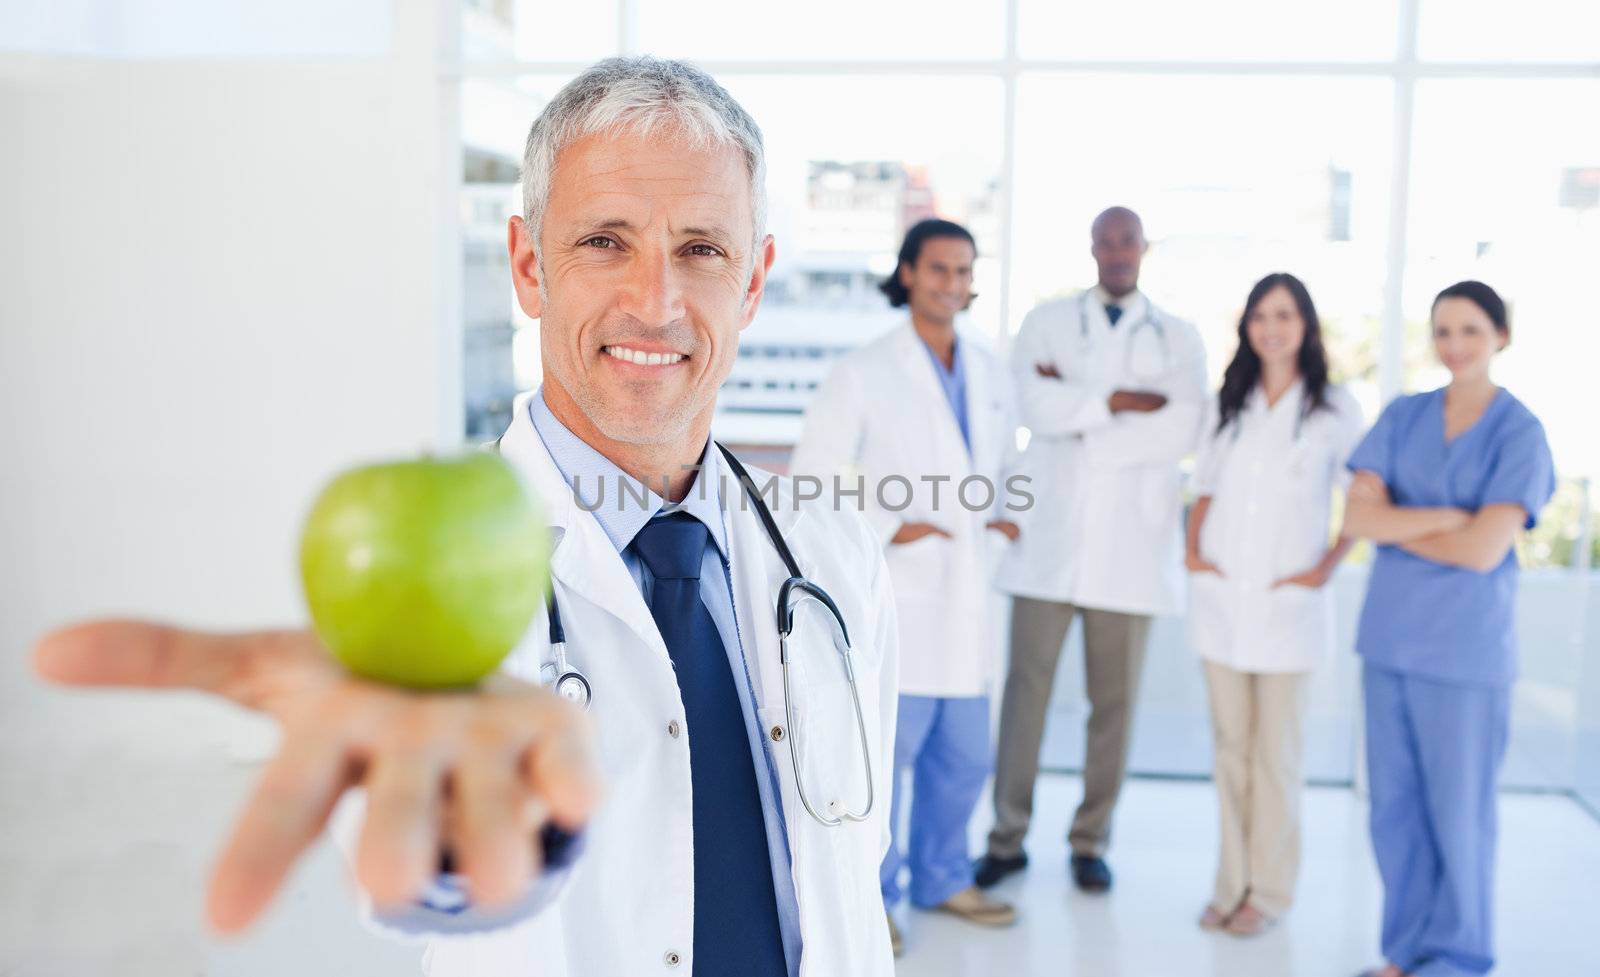 Medical interns in the background looking at their doctor who is holding an apple